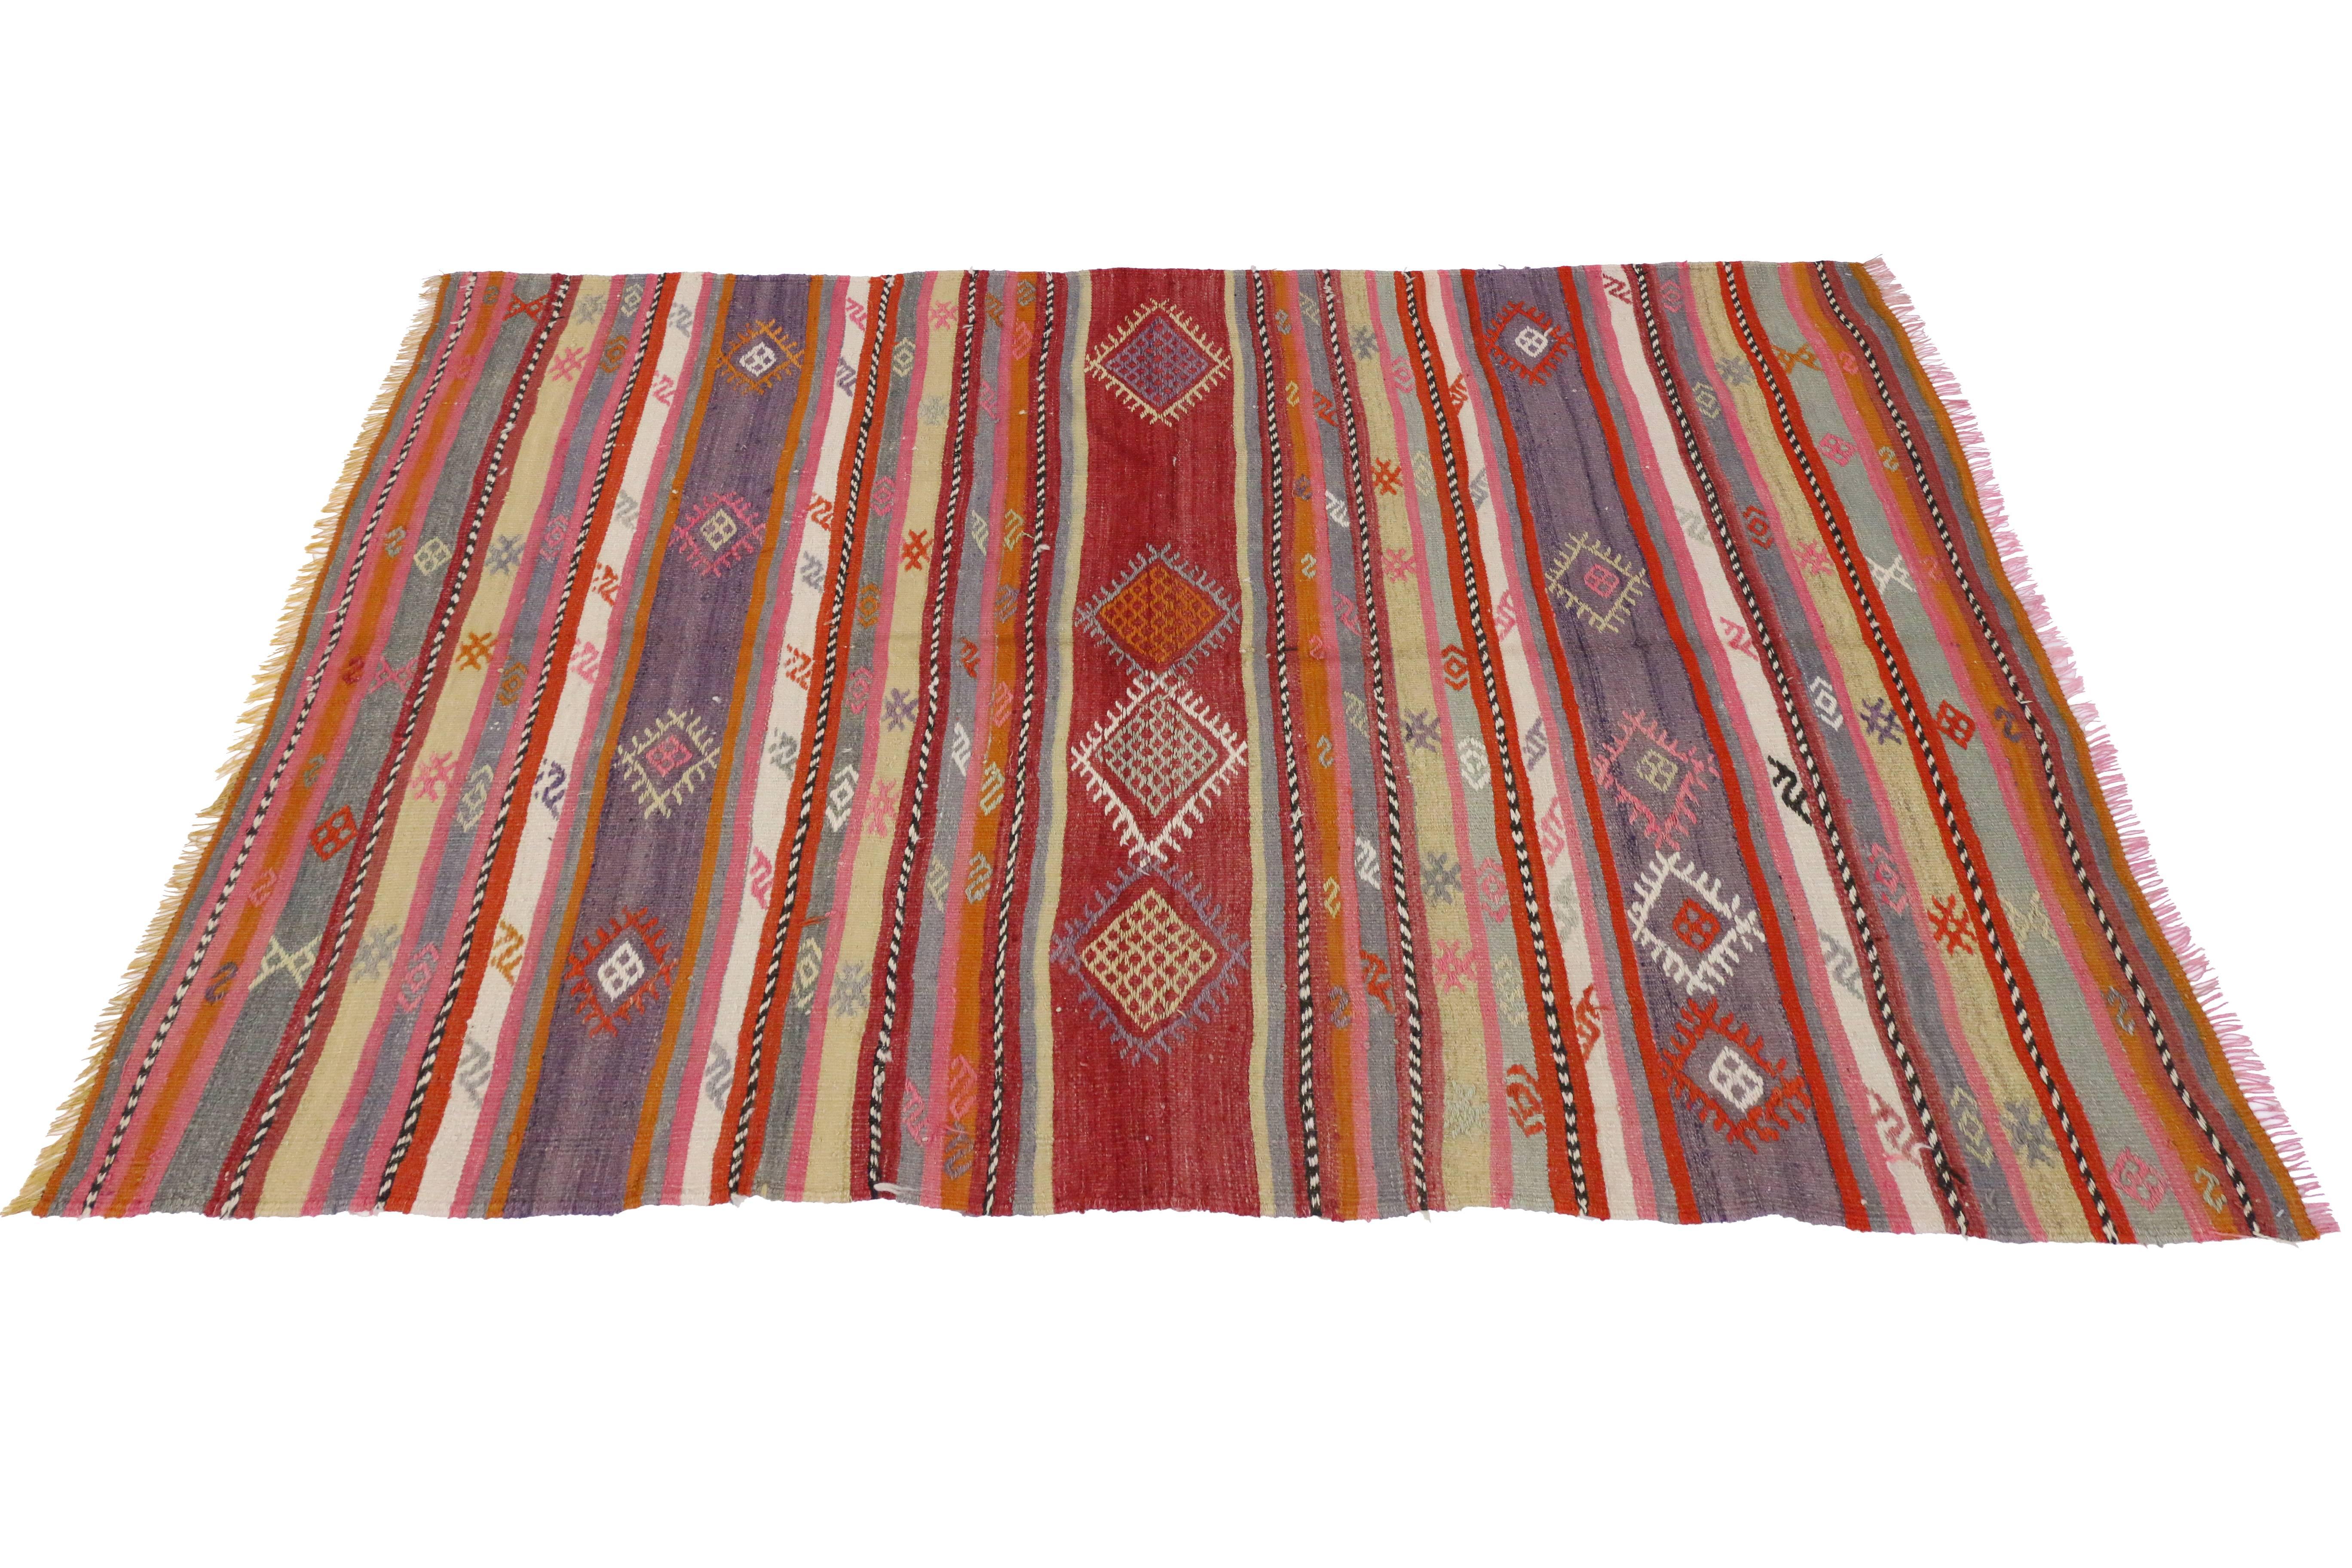 Hand-Woven Turkish Tribal Kilim with Boho Chic Style in Pink, Red and Purple Stripes